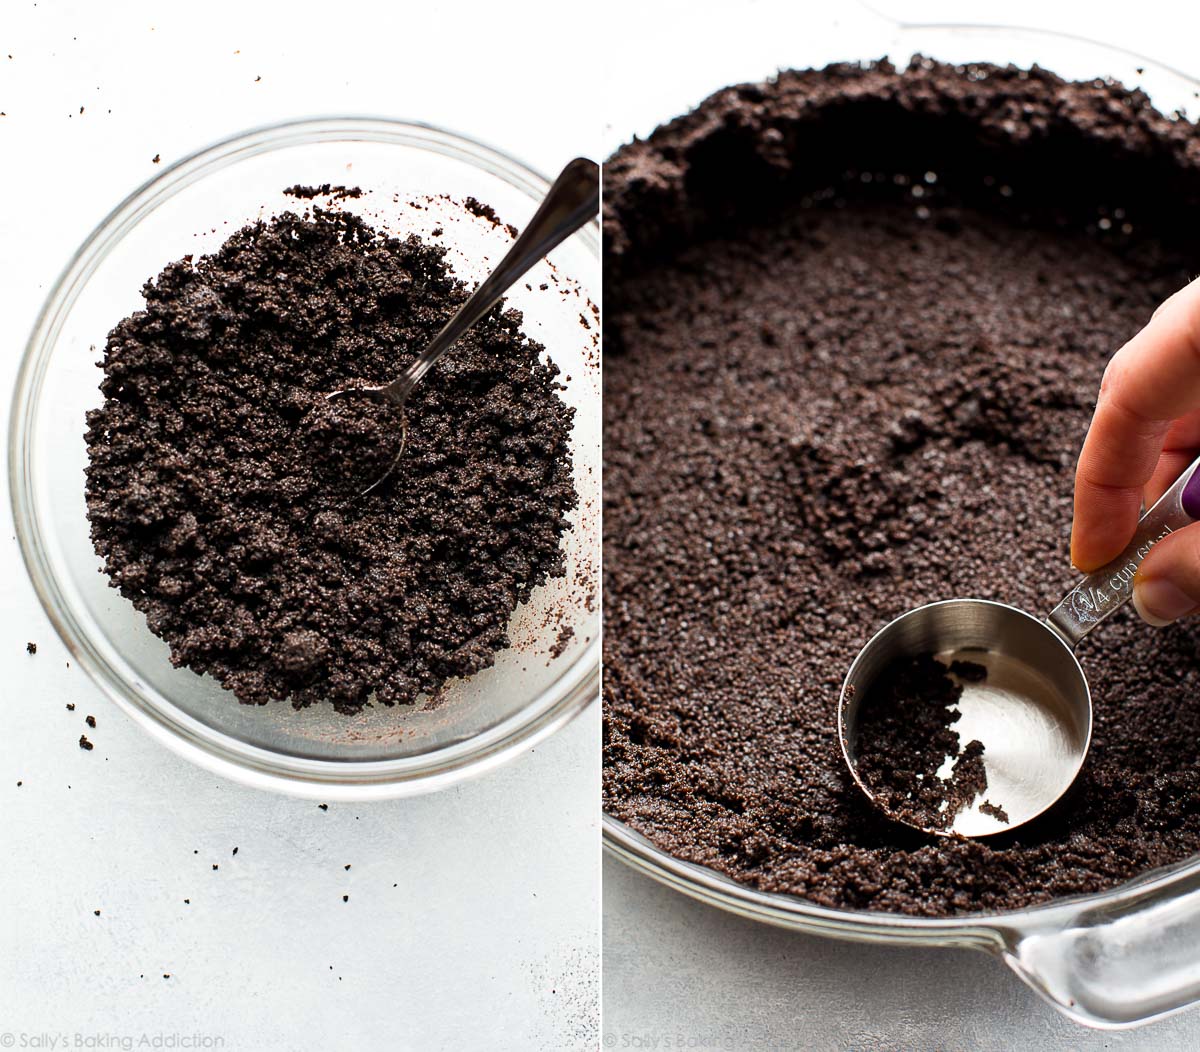 2 images of Oreo cookie crust in a glass bowl and pressing crust mixture into glass pie dish with a measuring cup